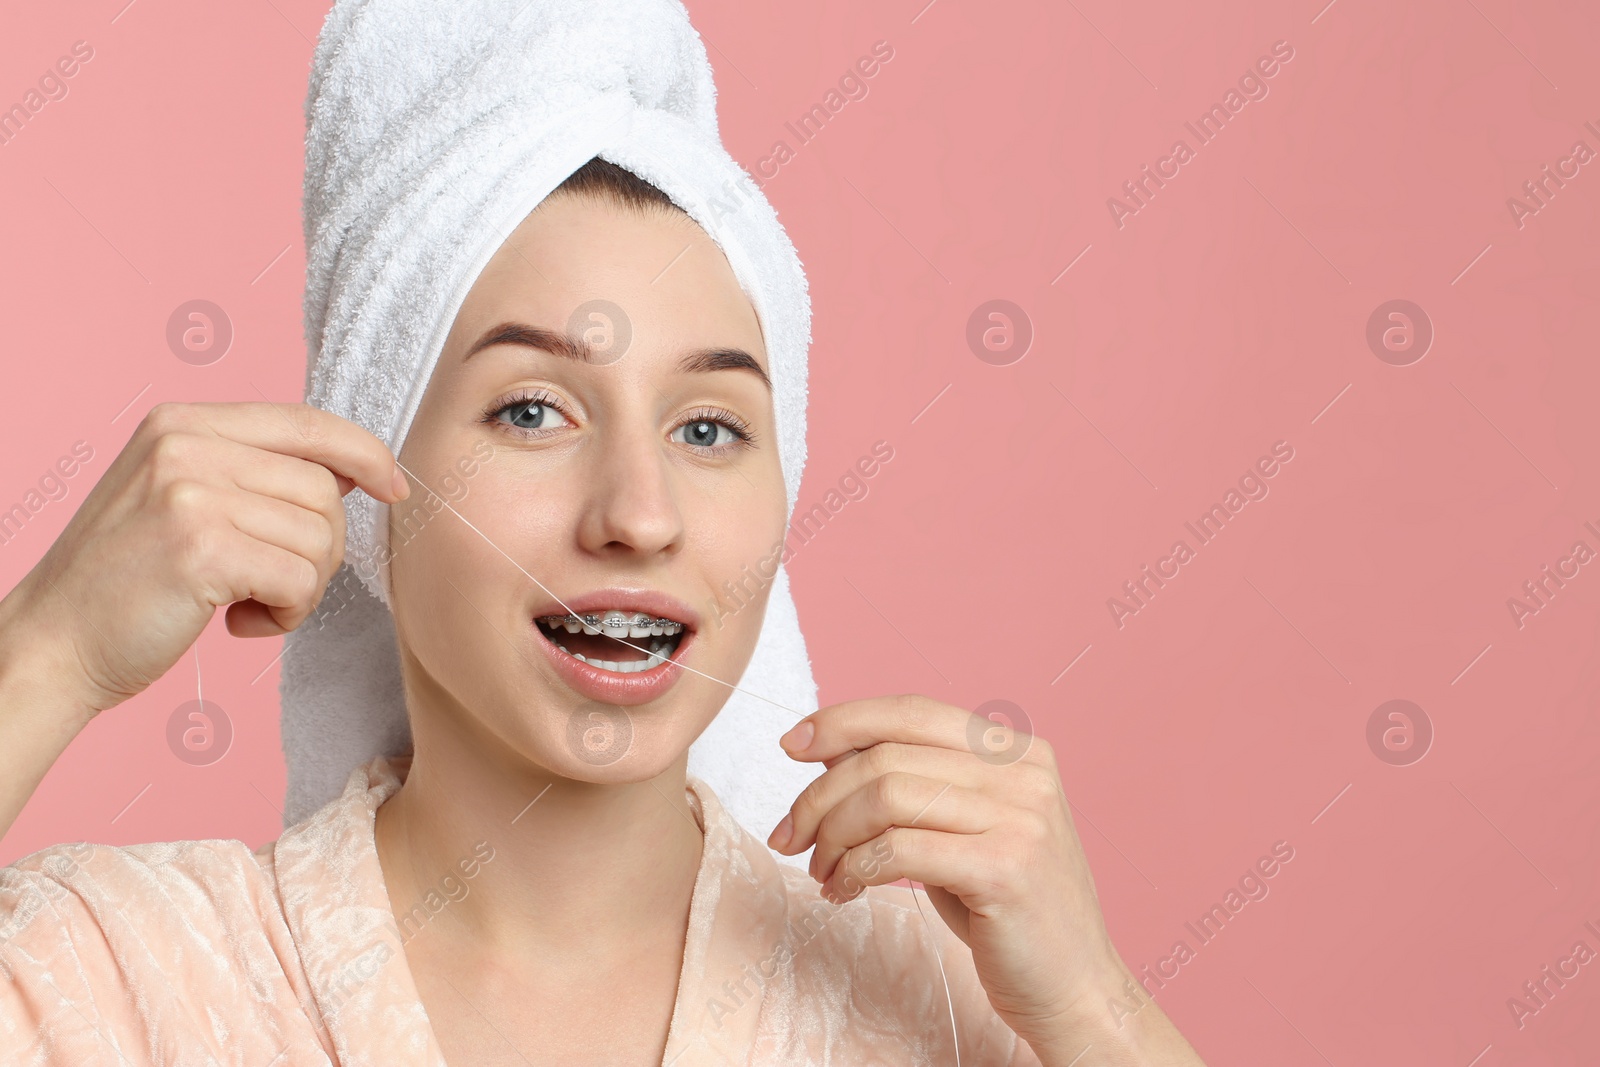 Photo of Woman with braces cleaning teeth using dental floss on pink background. Space for text